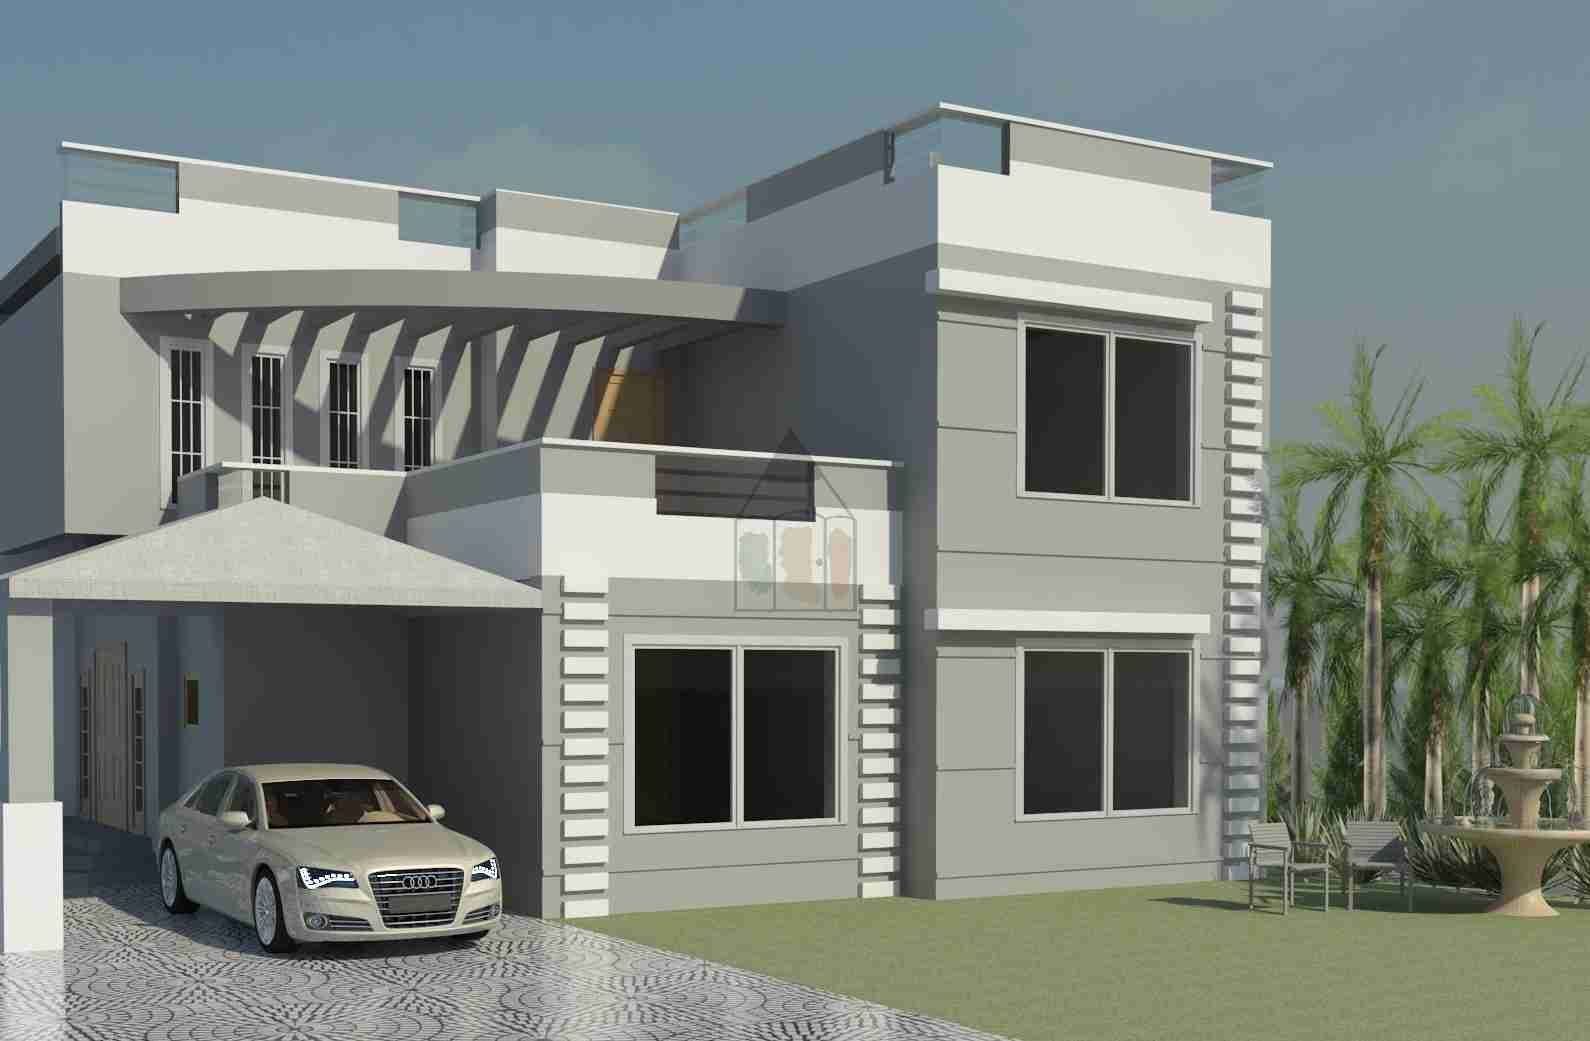 design my own house plans plan awesome build your architecture online